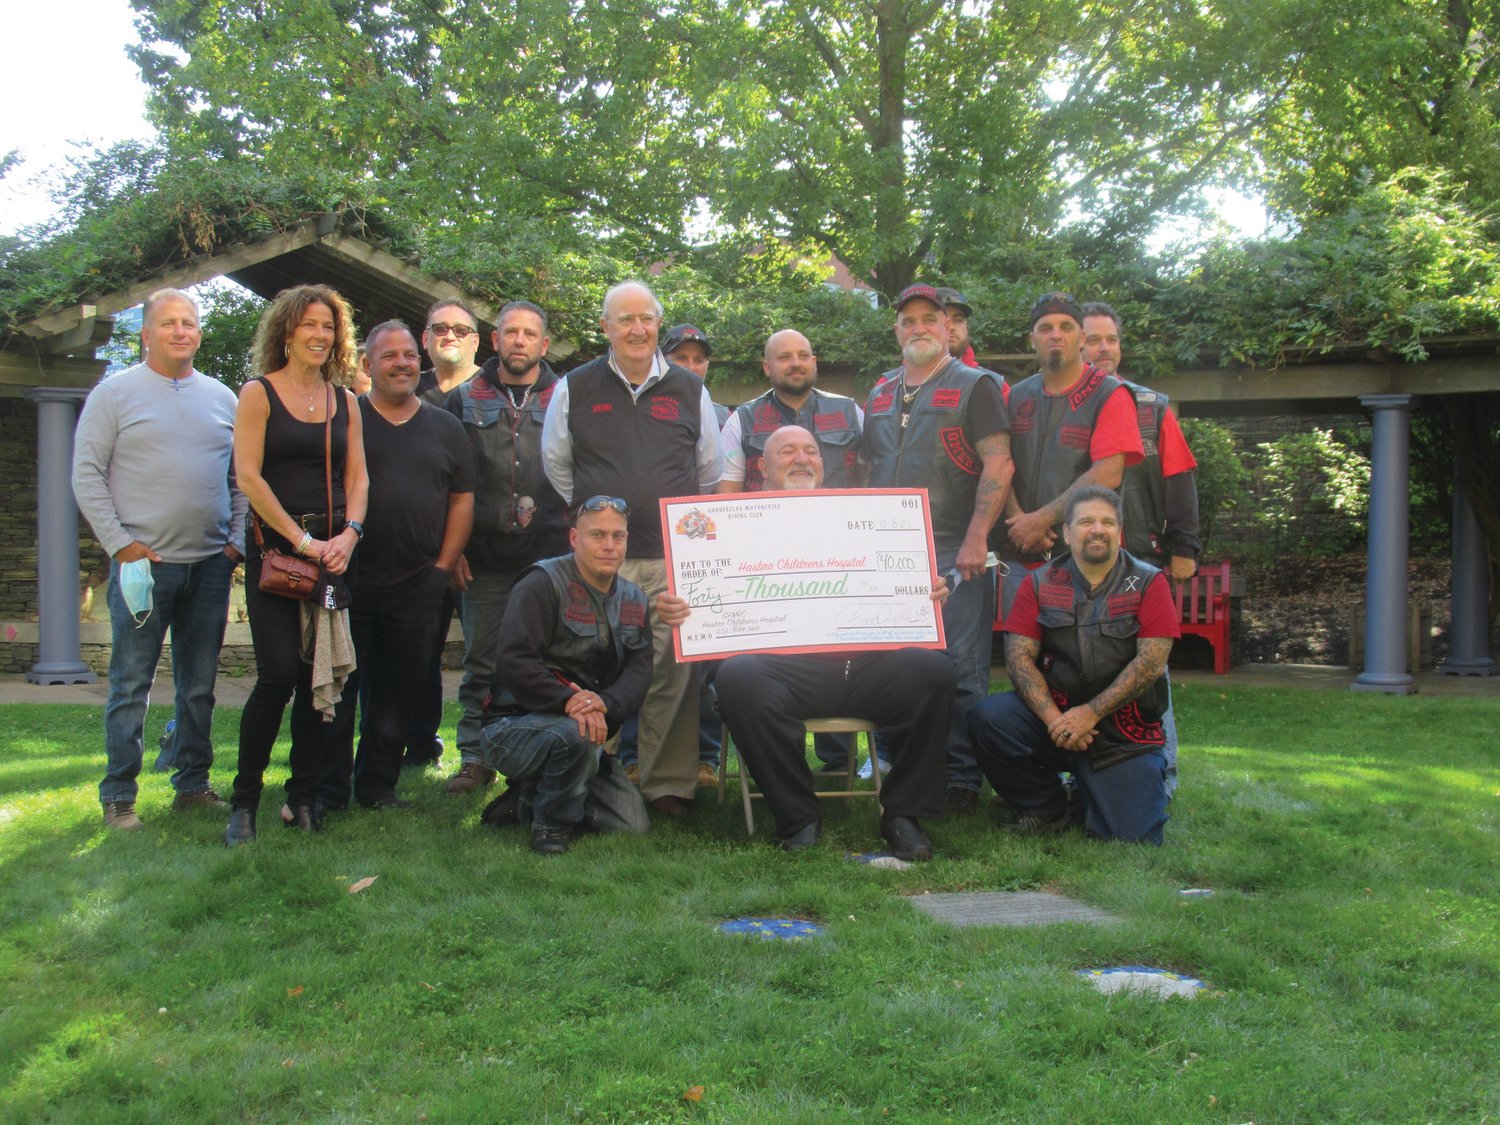 GRAND GROUP: Last year, Goodfellas Motorcycle Club Treasurer Anthony “Cal” Calabro is all smiles as he holds the club’s ceremonial check for $40,000. He’s backed by members and friends inside the Healing Garden at Hasbro Children’s Hospital.